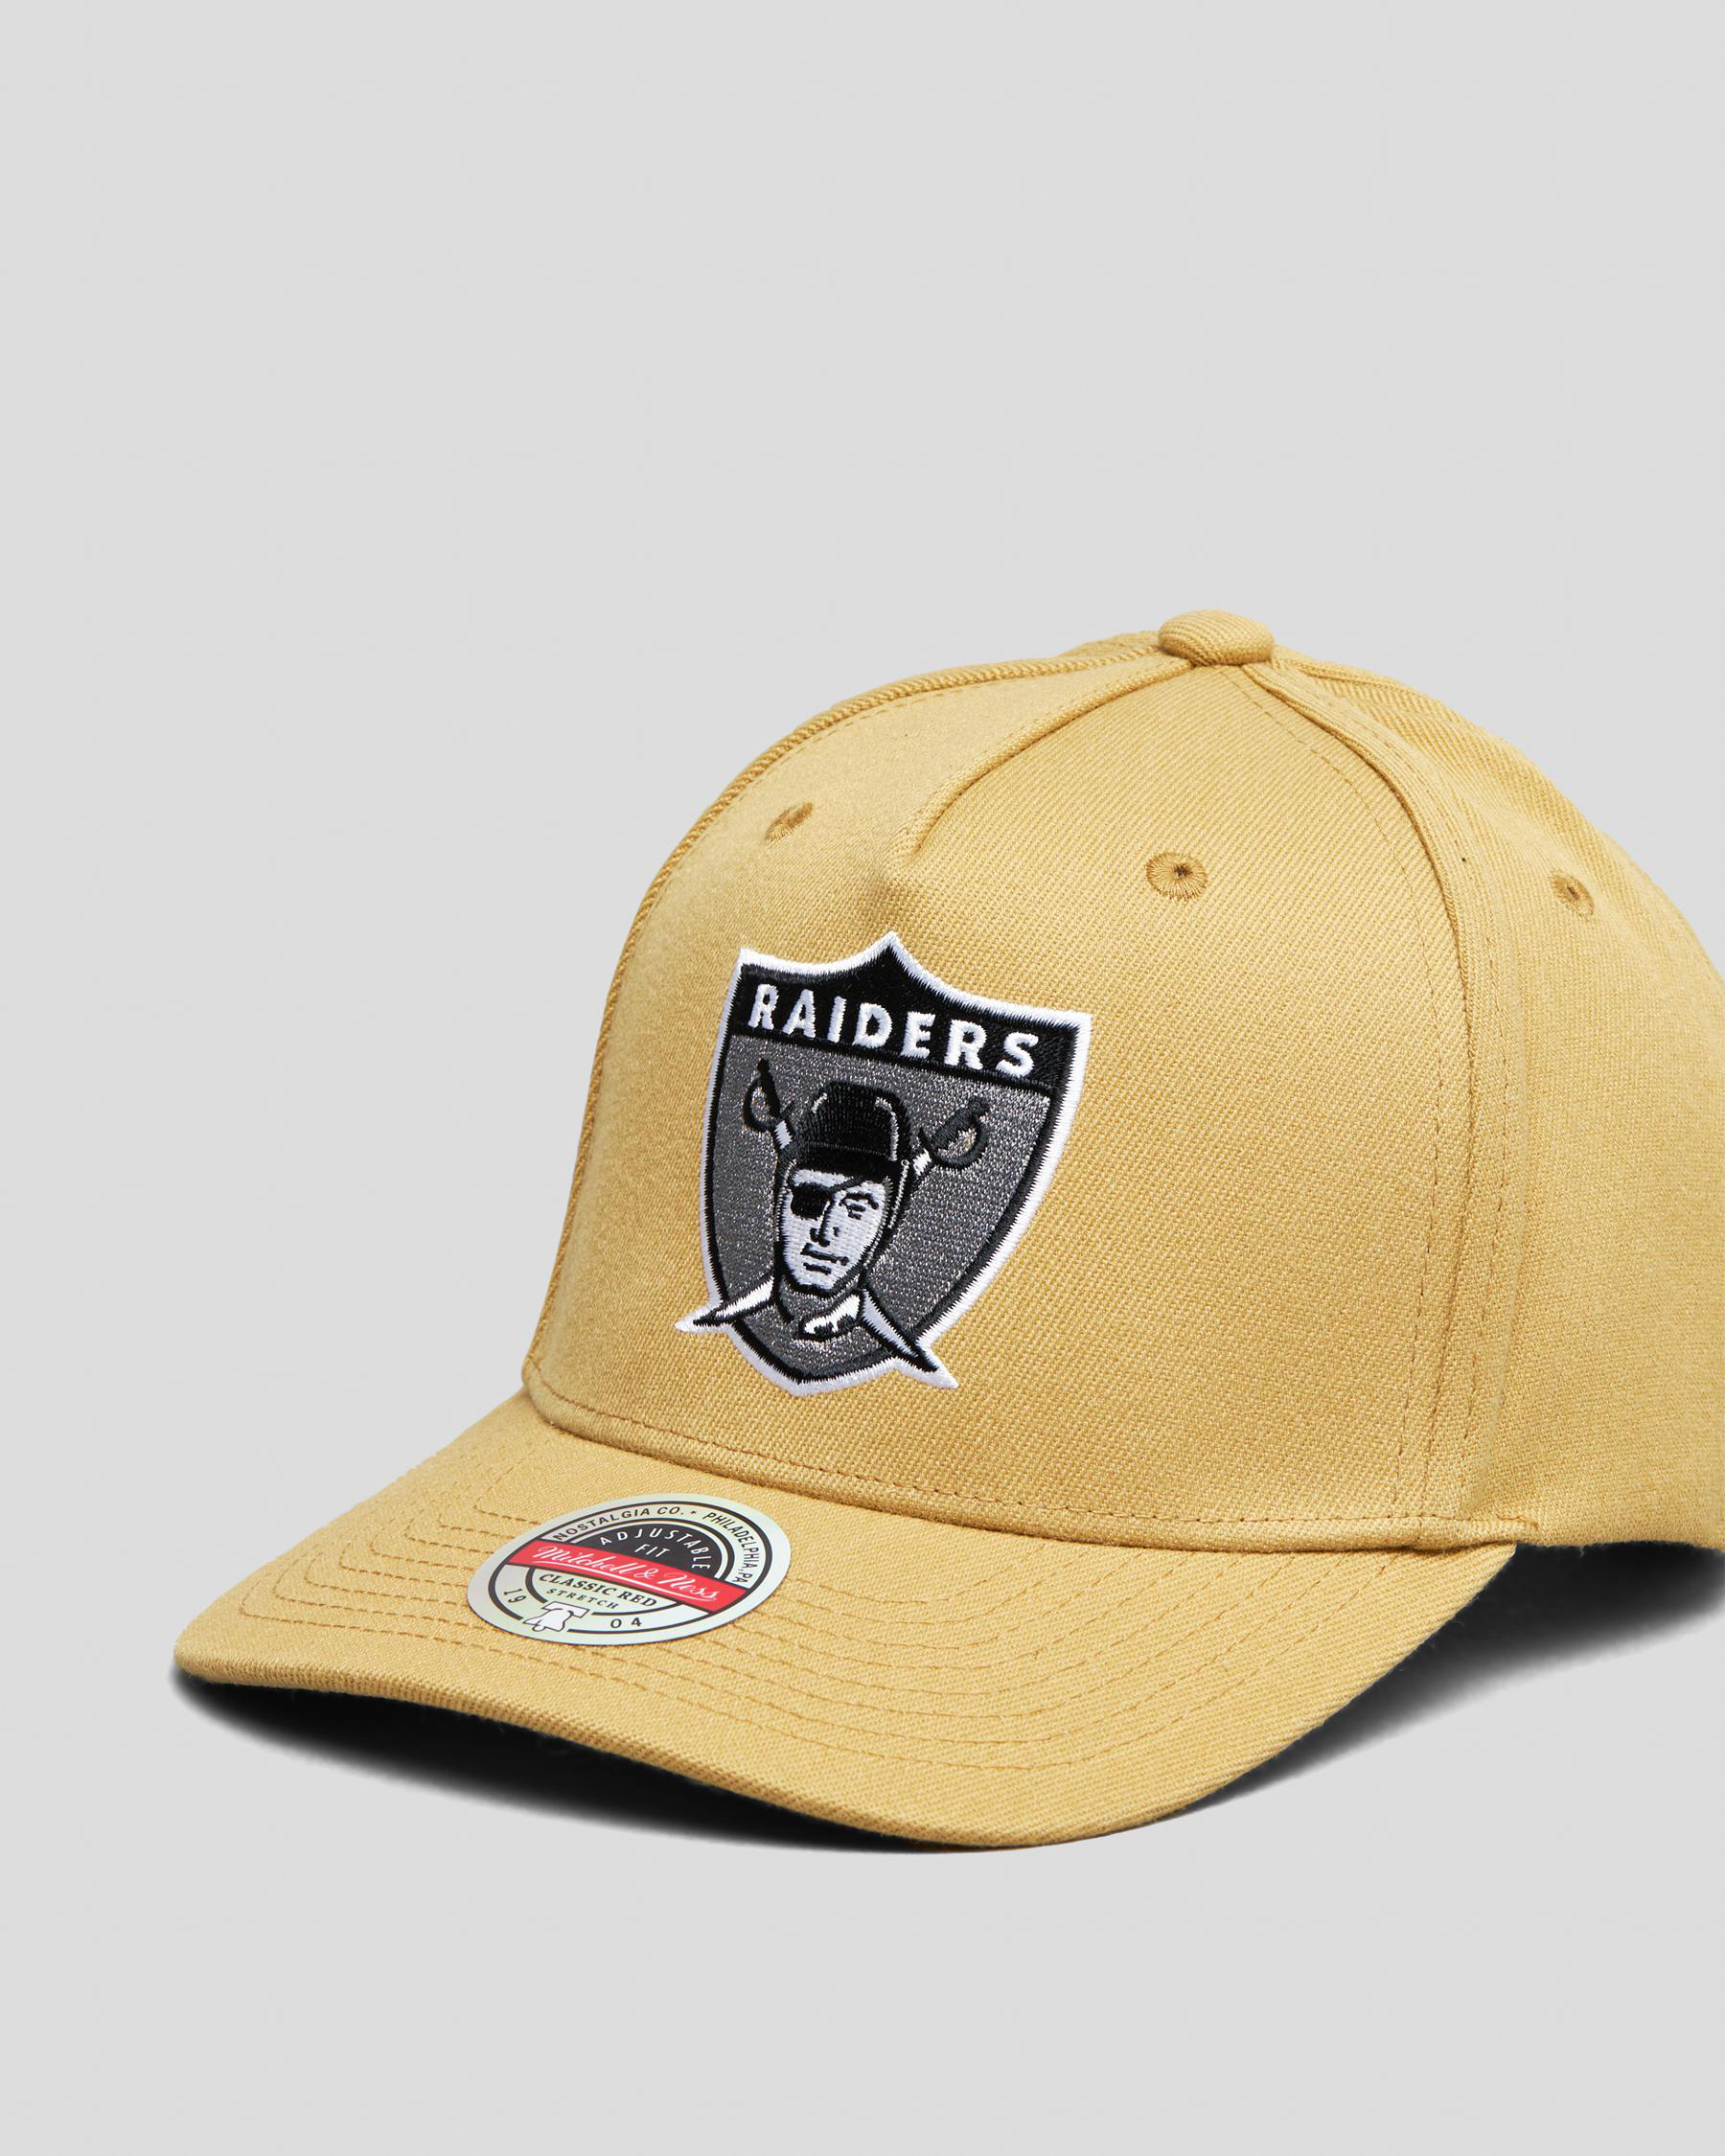 Mitchell & Ness Oakland Raiders Cap In Tan - FREE* Shipping & Easy Returns  - City Beach United States